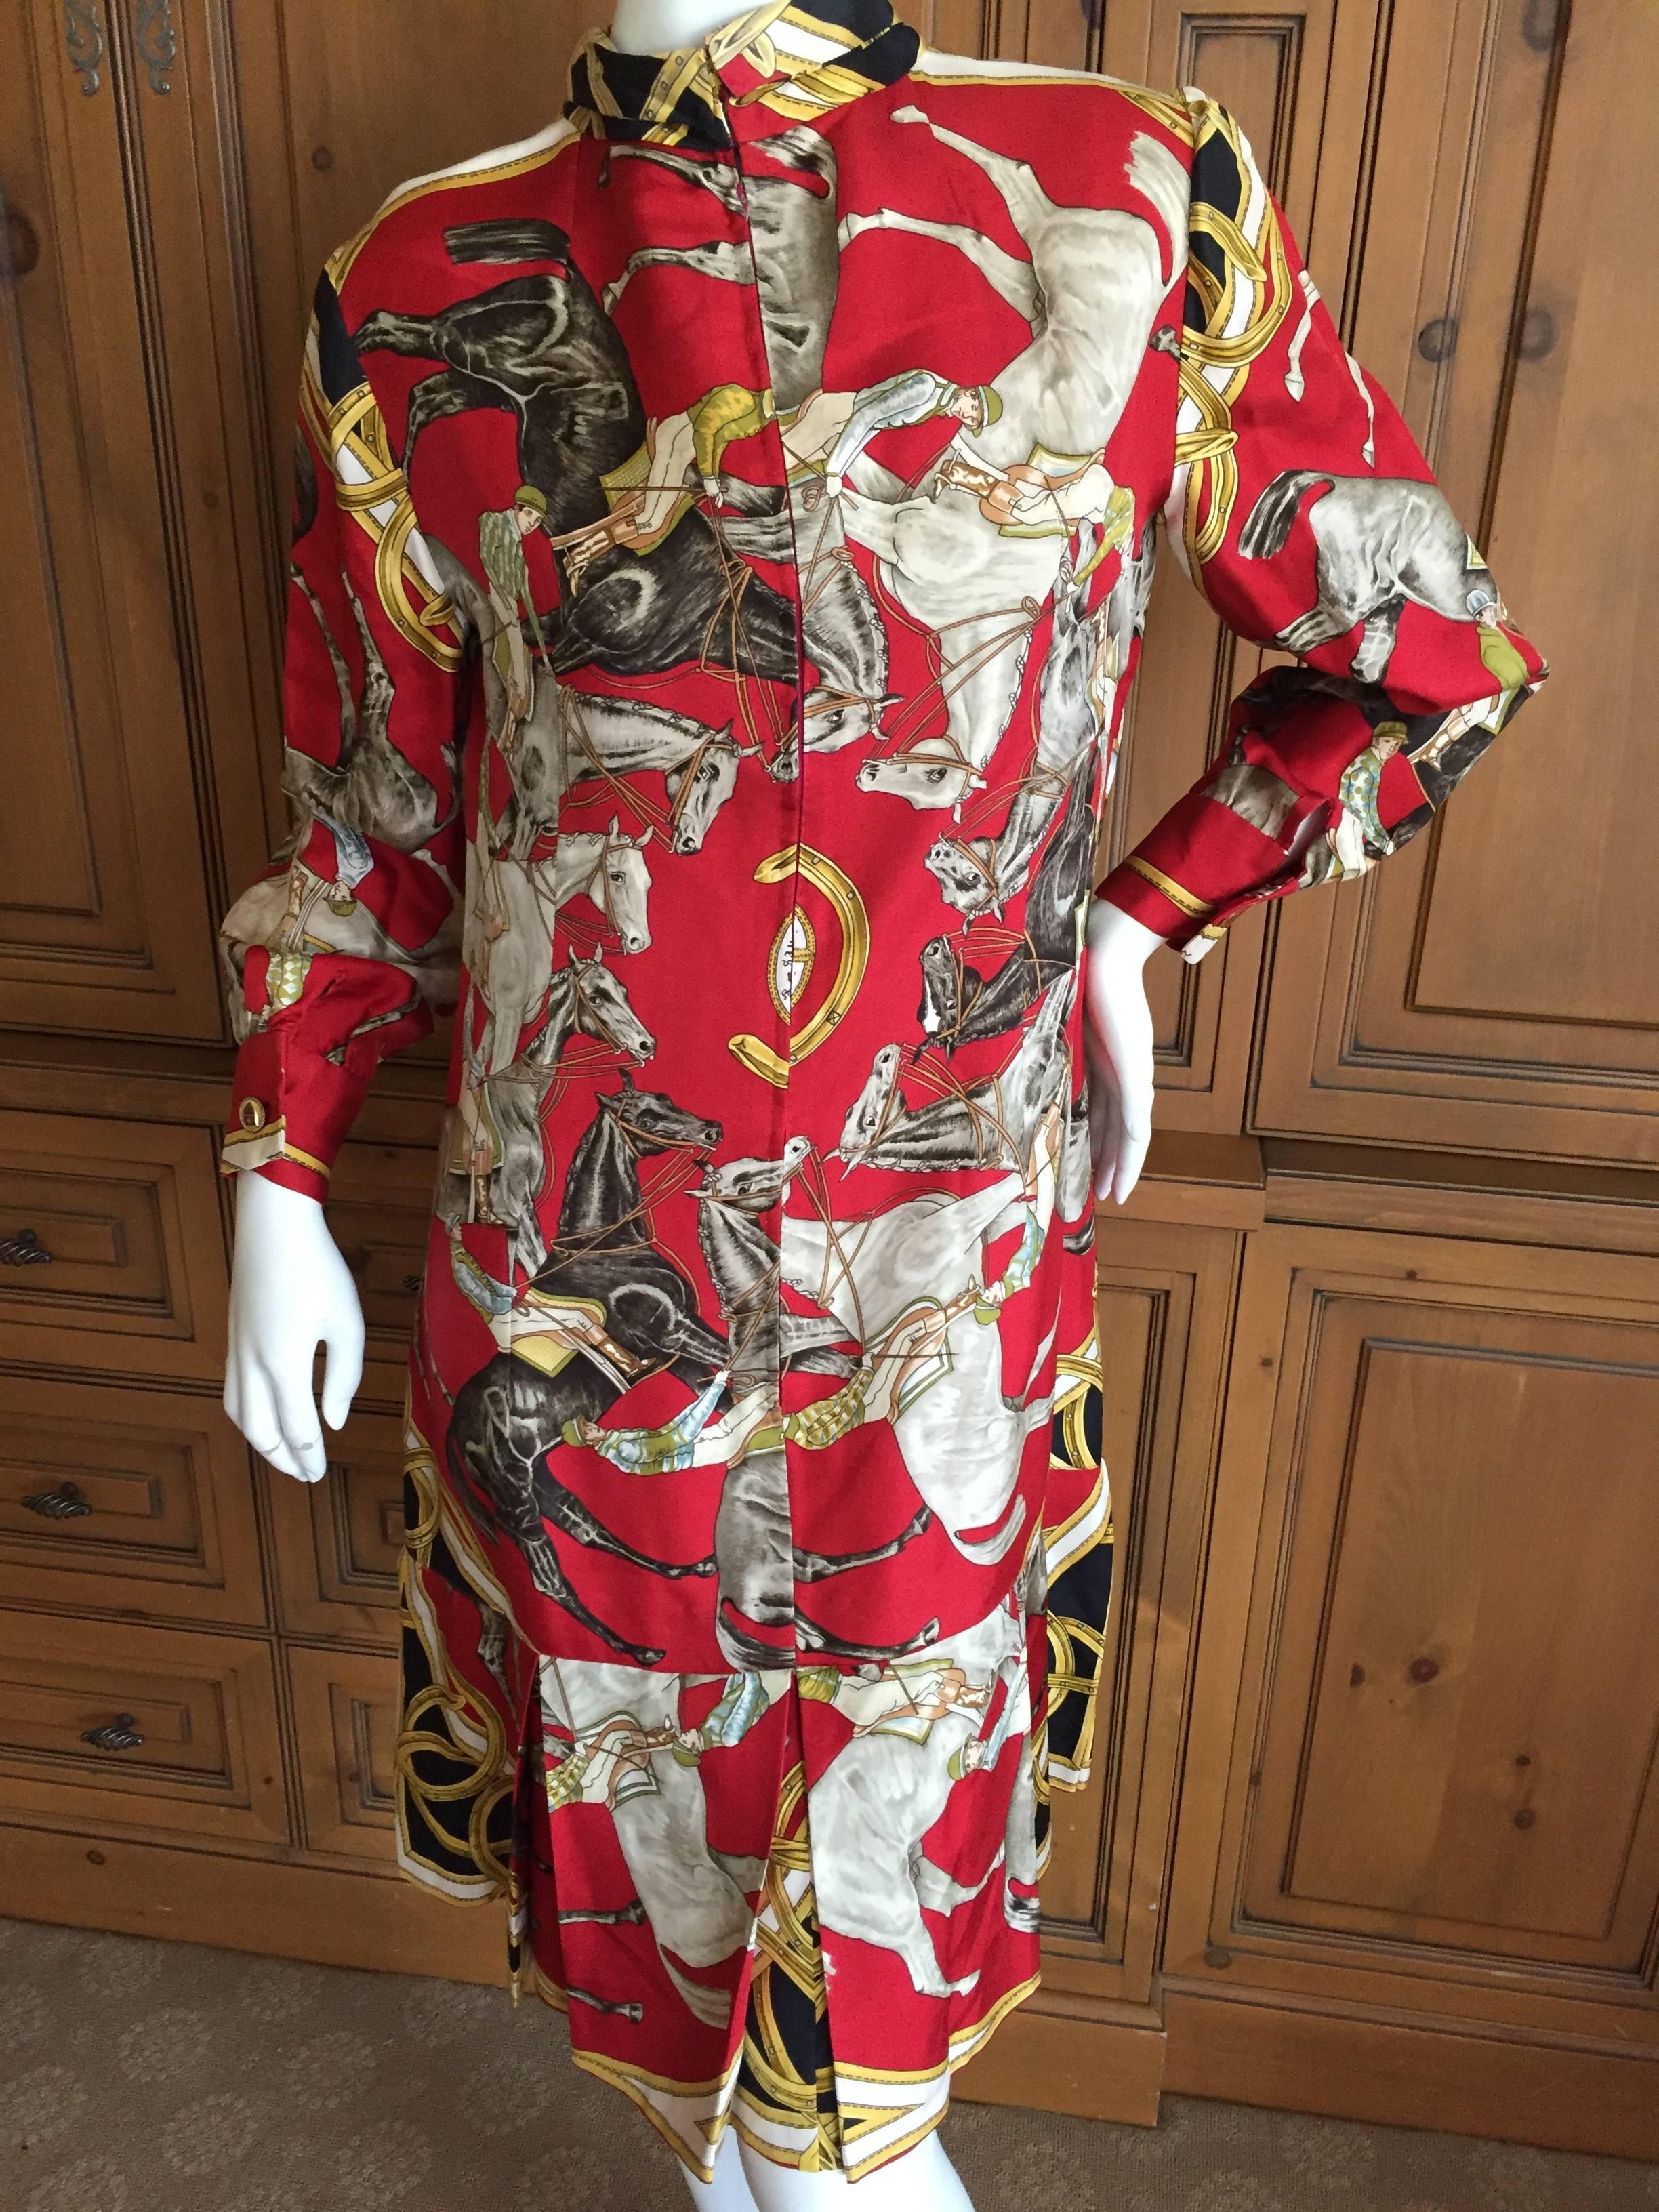 Luxurious silk dress created of Hermes silk scarf in the
 